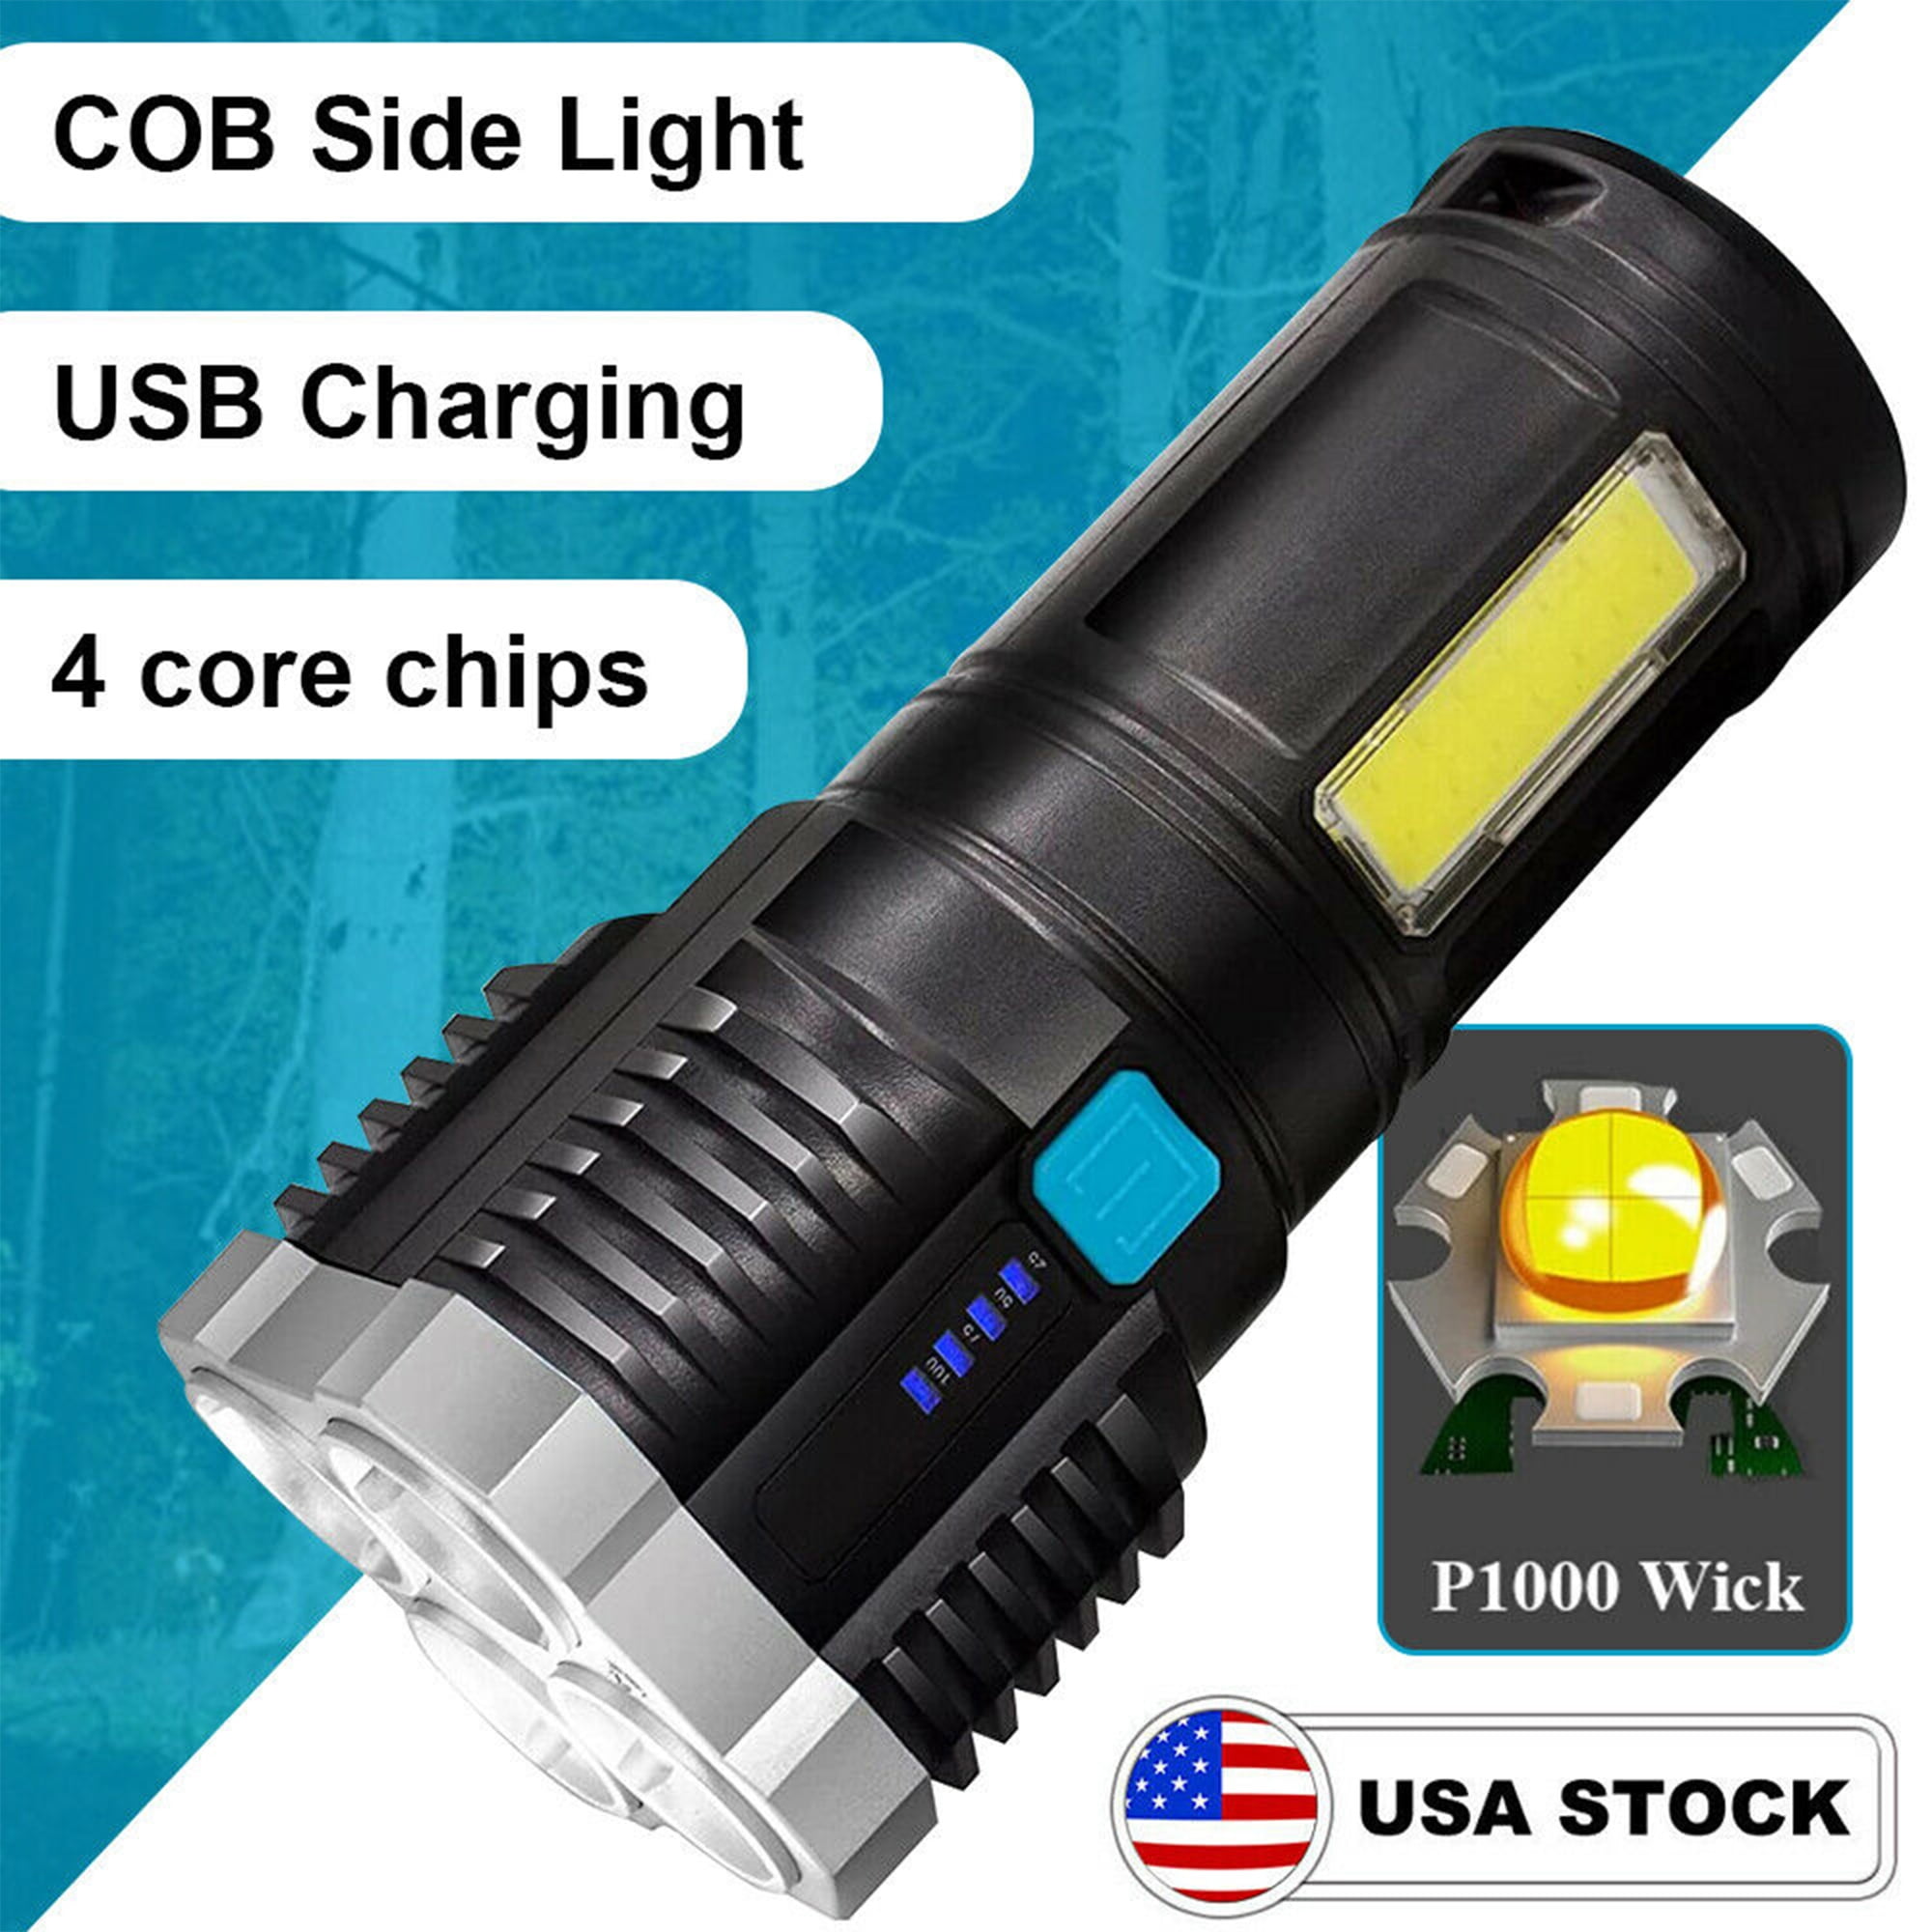 LED Worklight Torch with Magnet & Hook 2 x 3W Chip on Board COB 